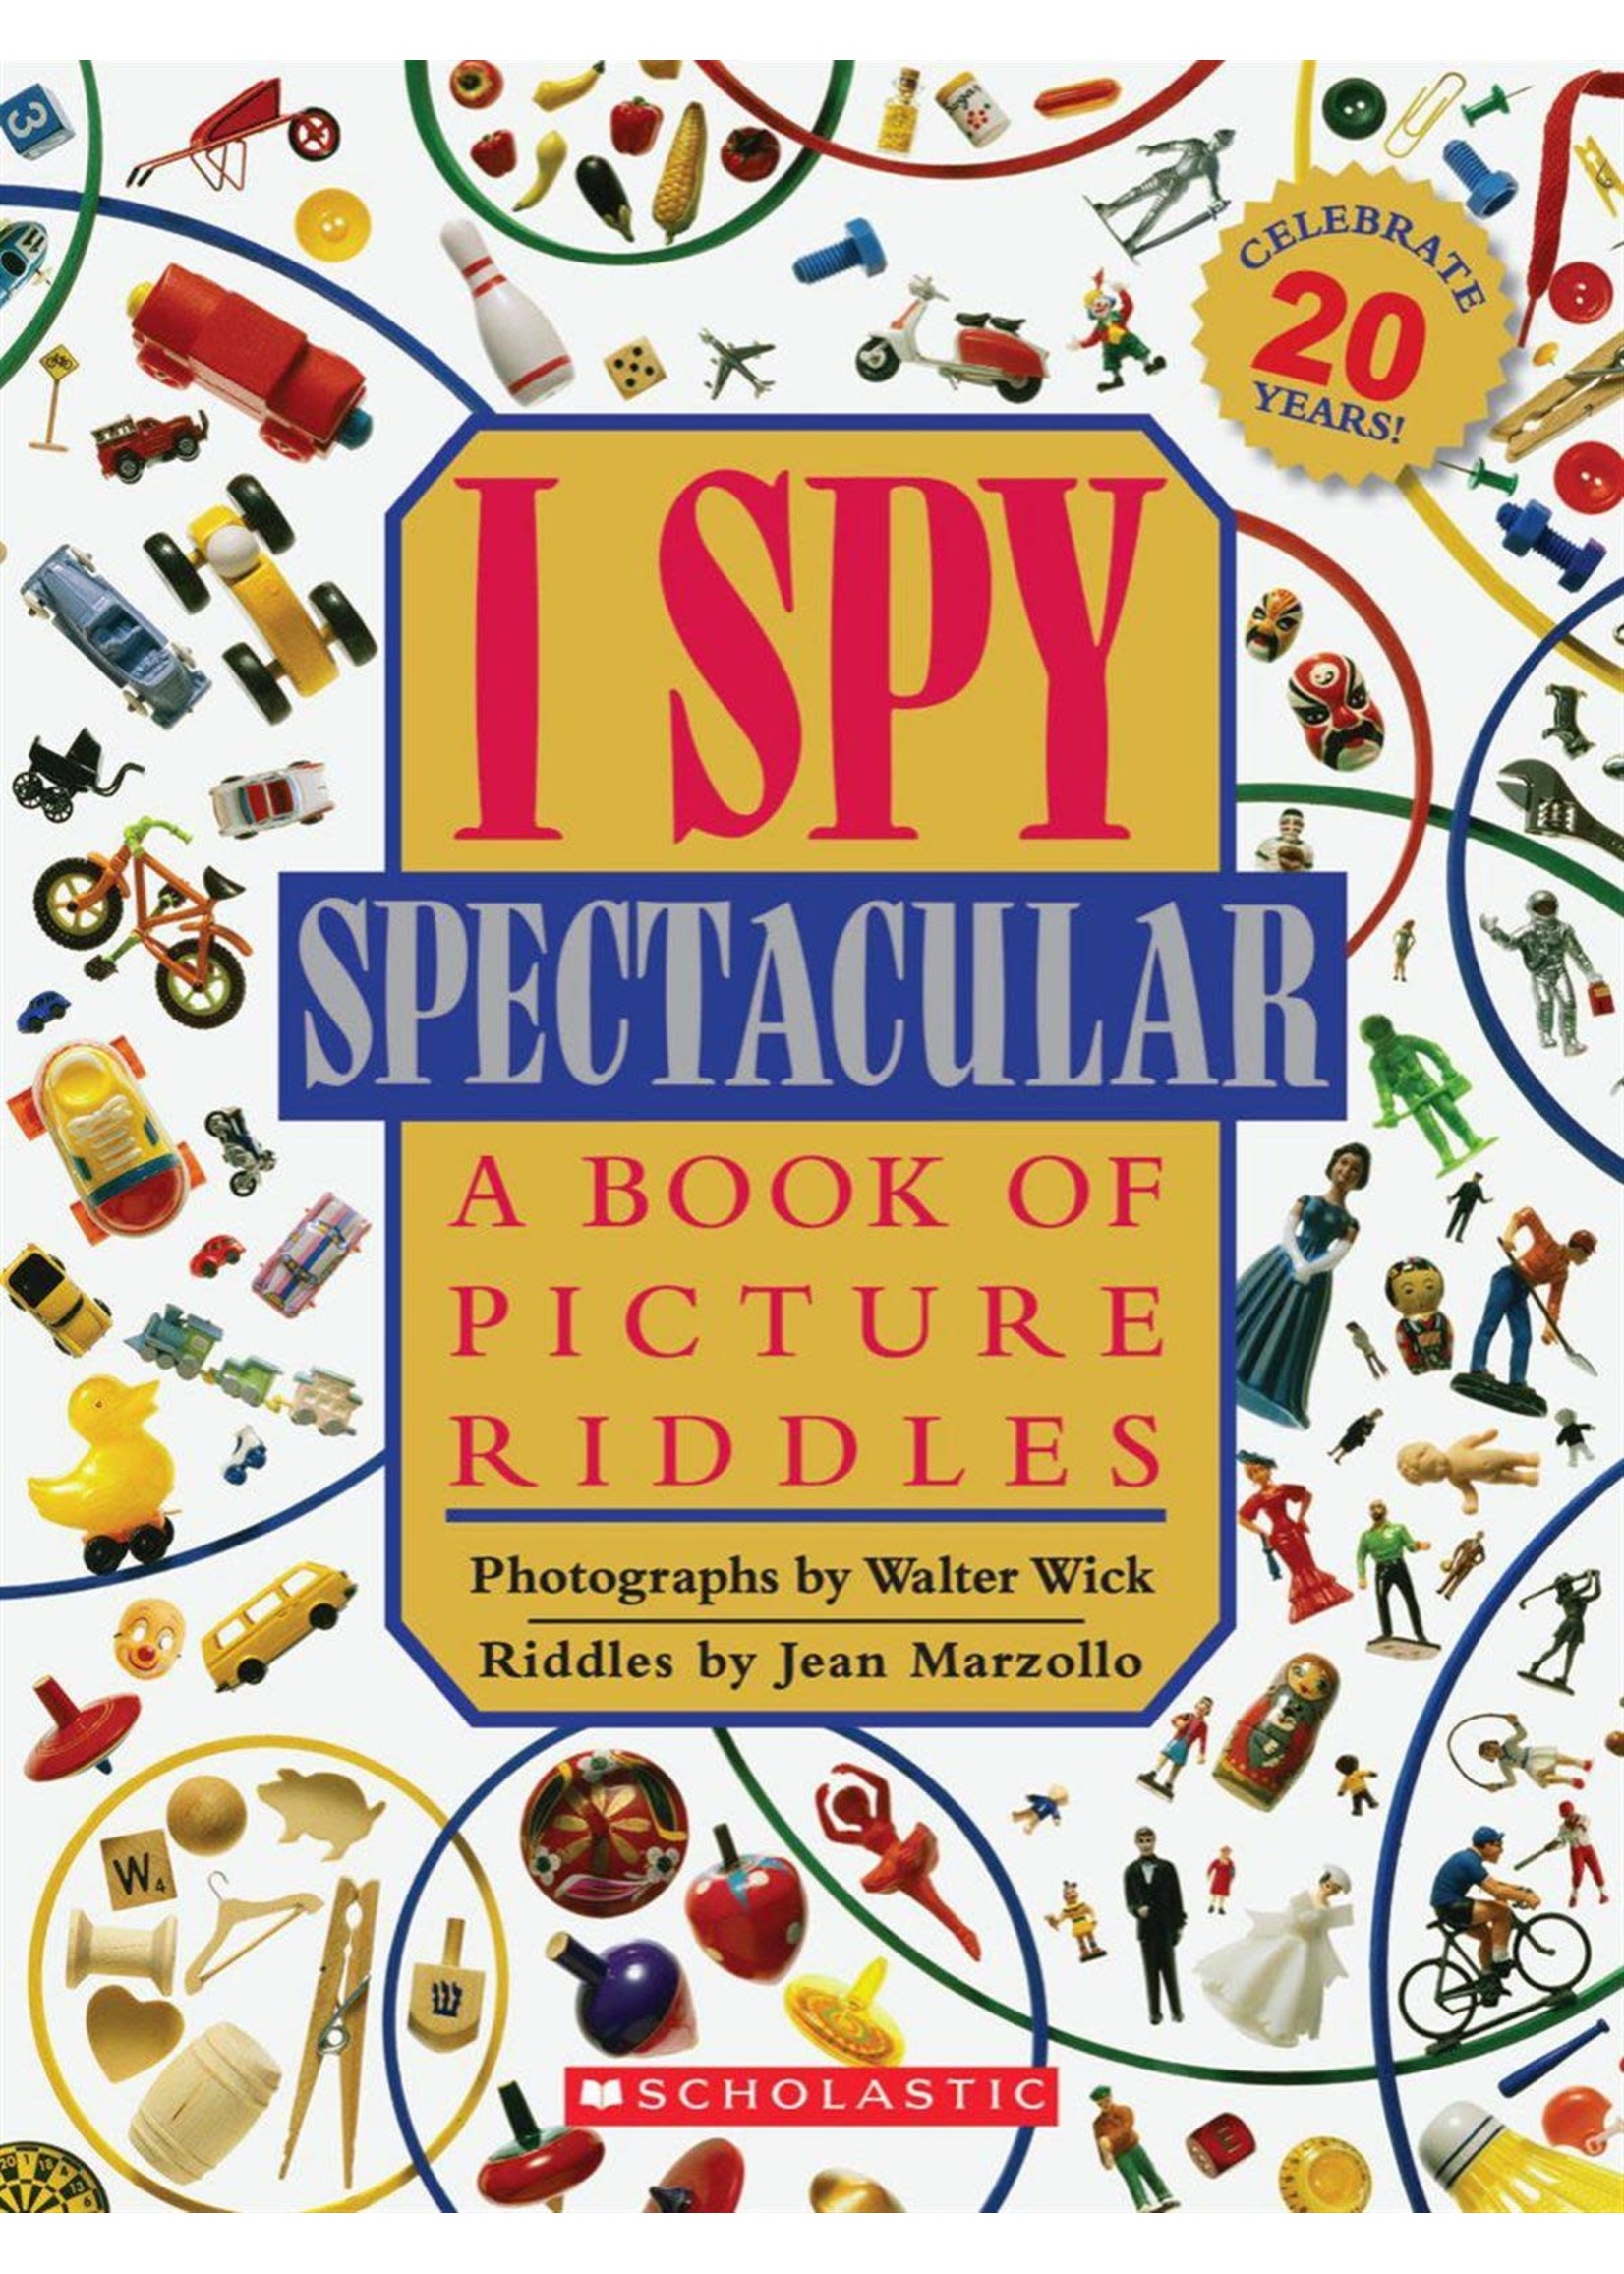 I Spy Spectacular: A Book of Picture Riddles by Jean Marzollo, Walter Wick